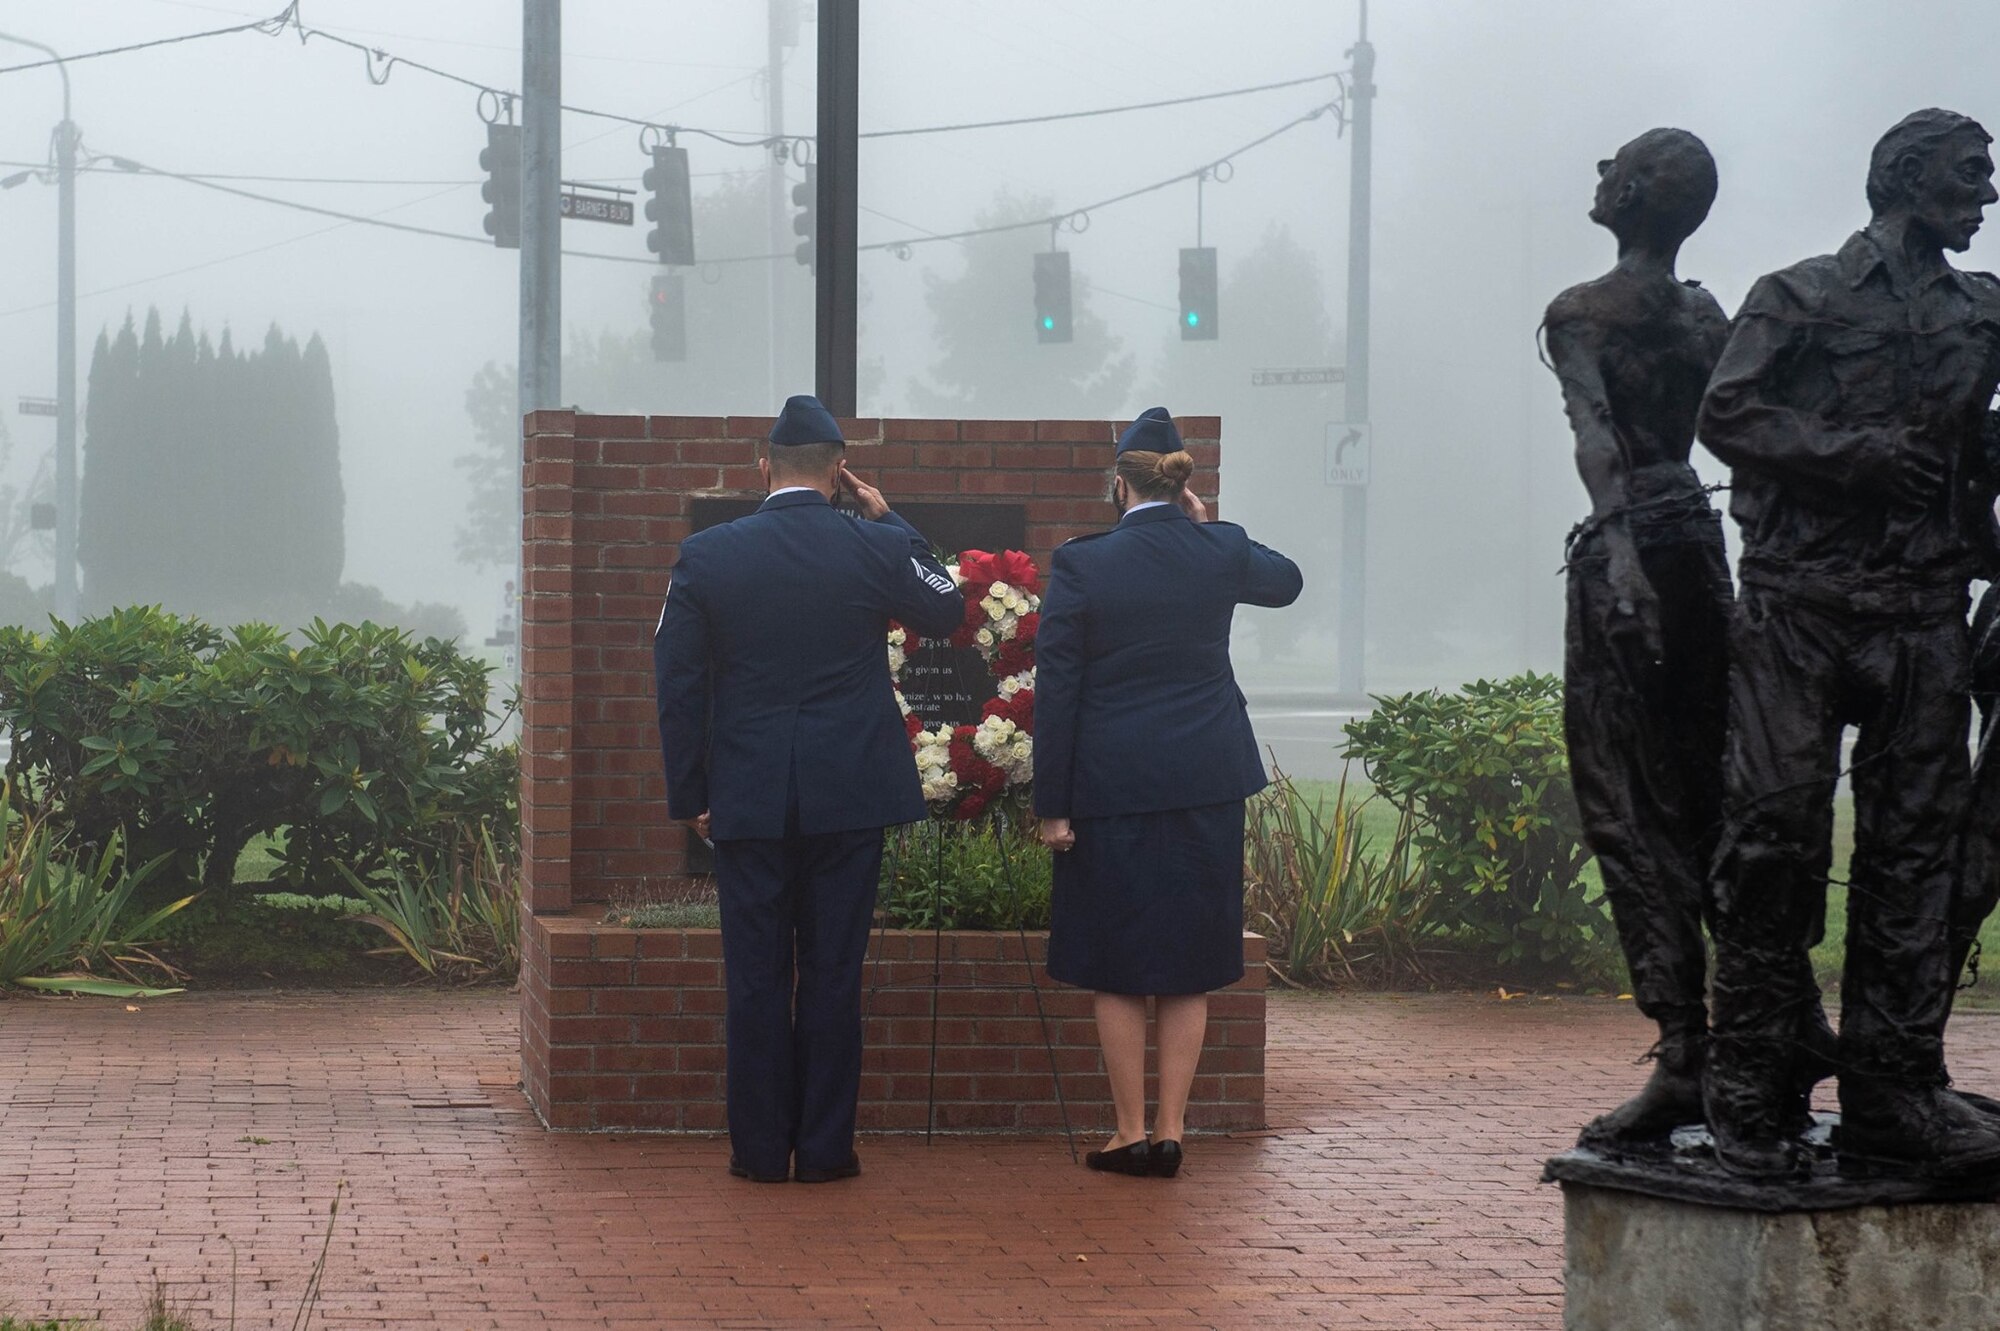 Chief Master Sgt. Joseph Arce, 62nd Airlift Wing command chief, left, and Col. Erin Staine-Pyne, 62nd AW commander, salute during a memorial for prisoners of war (POW) and service members missing in action (MIA).